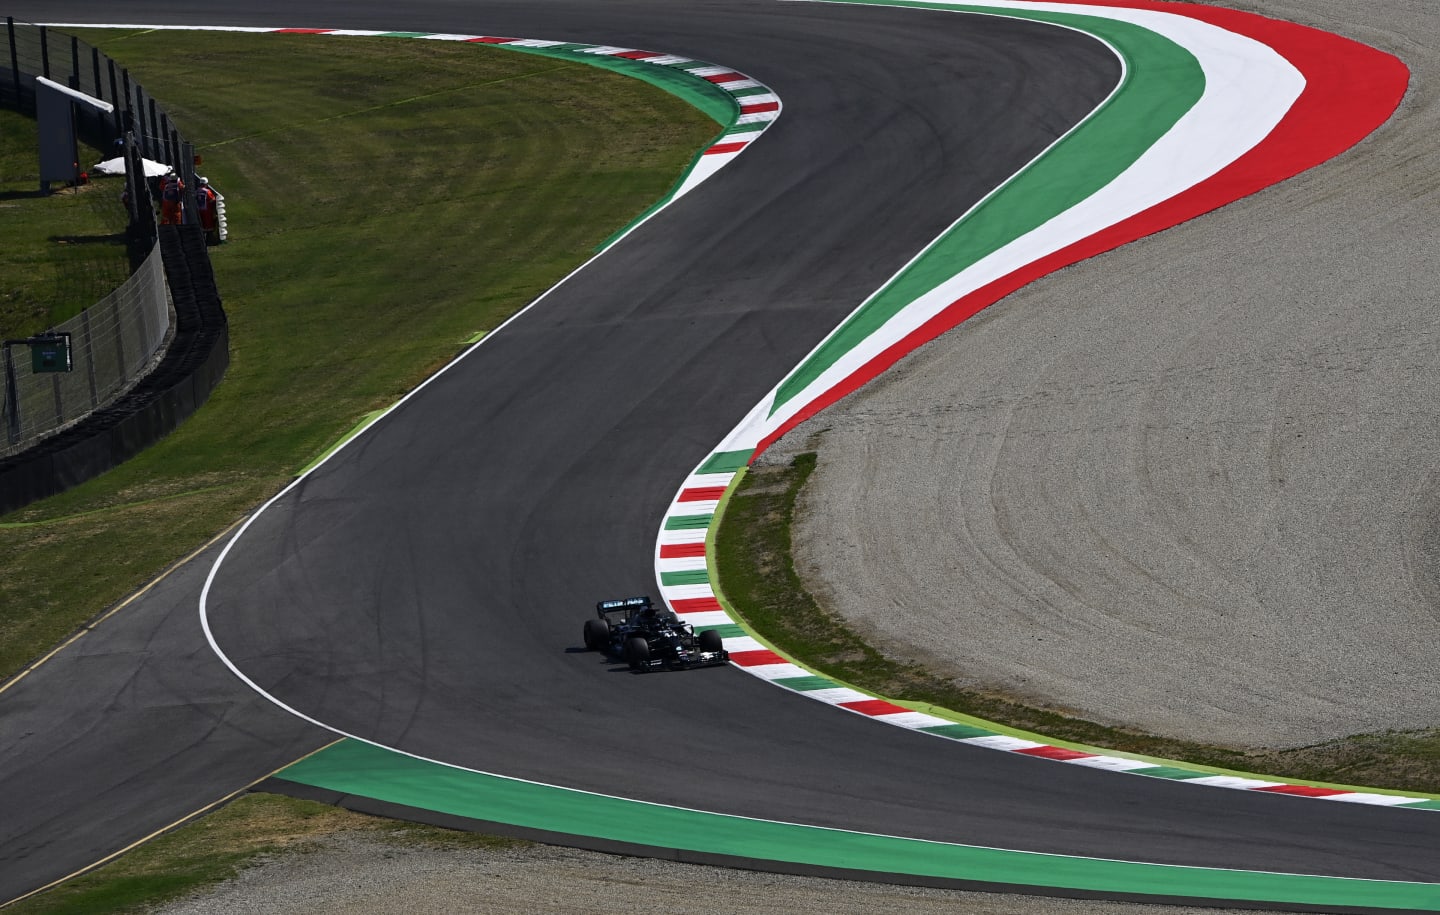 SCARPERIA, ITALY - SEPTEMBER 11: Lewis Hamilton of Great Britain driving the (44) Mercedes AMG